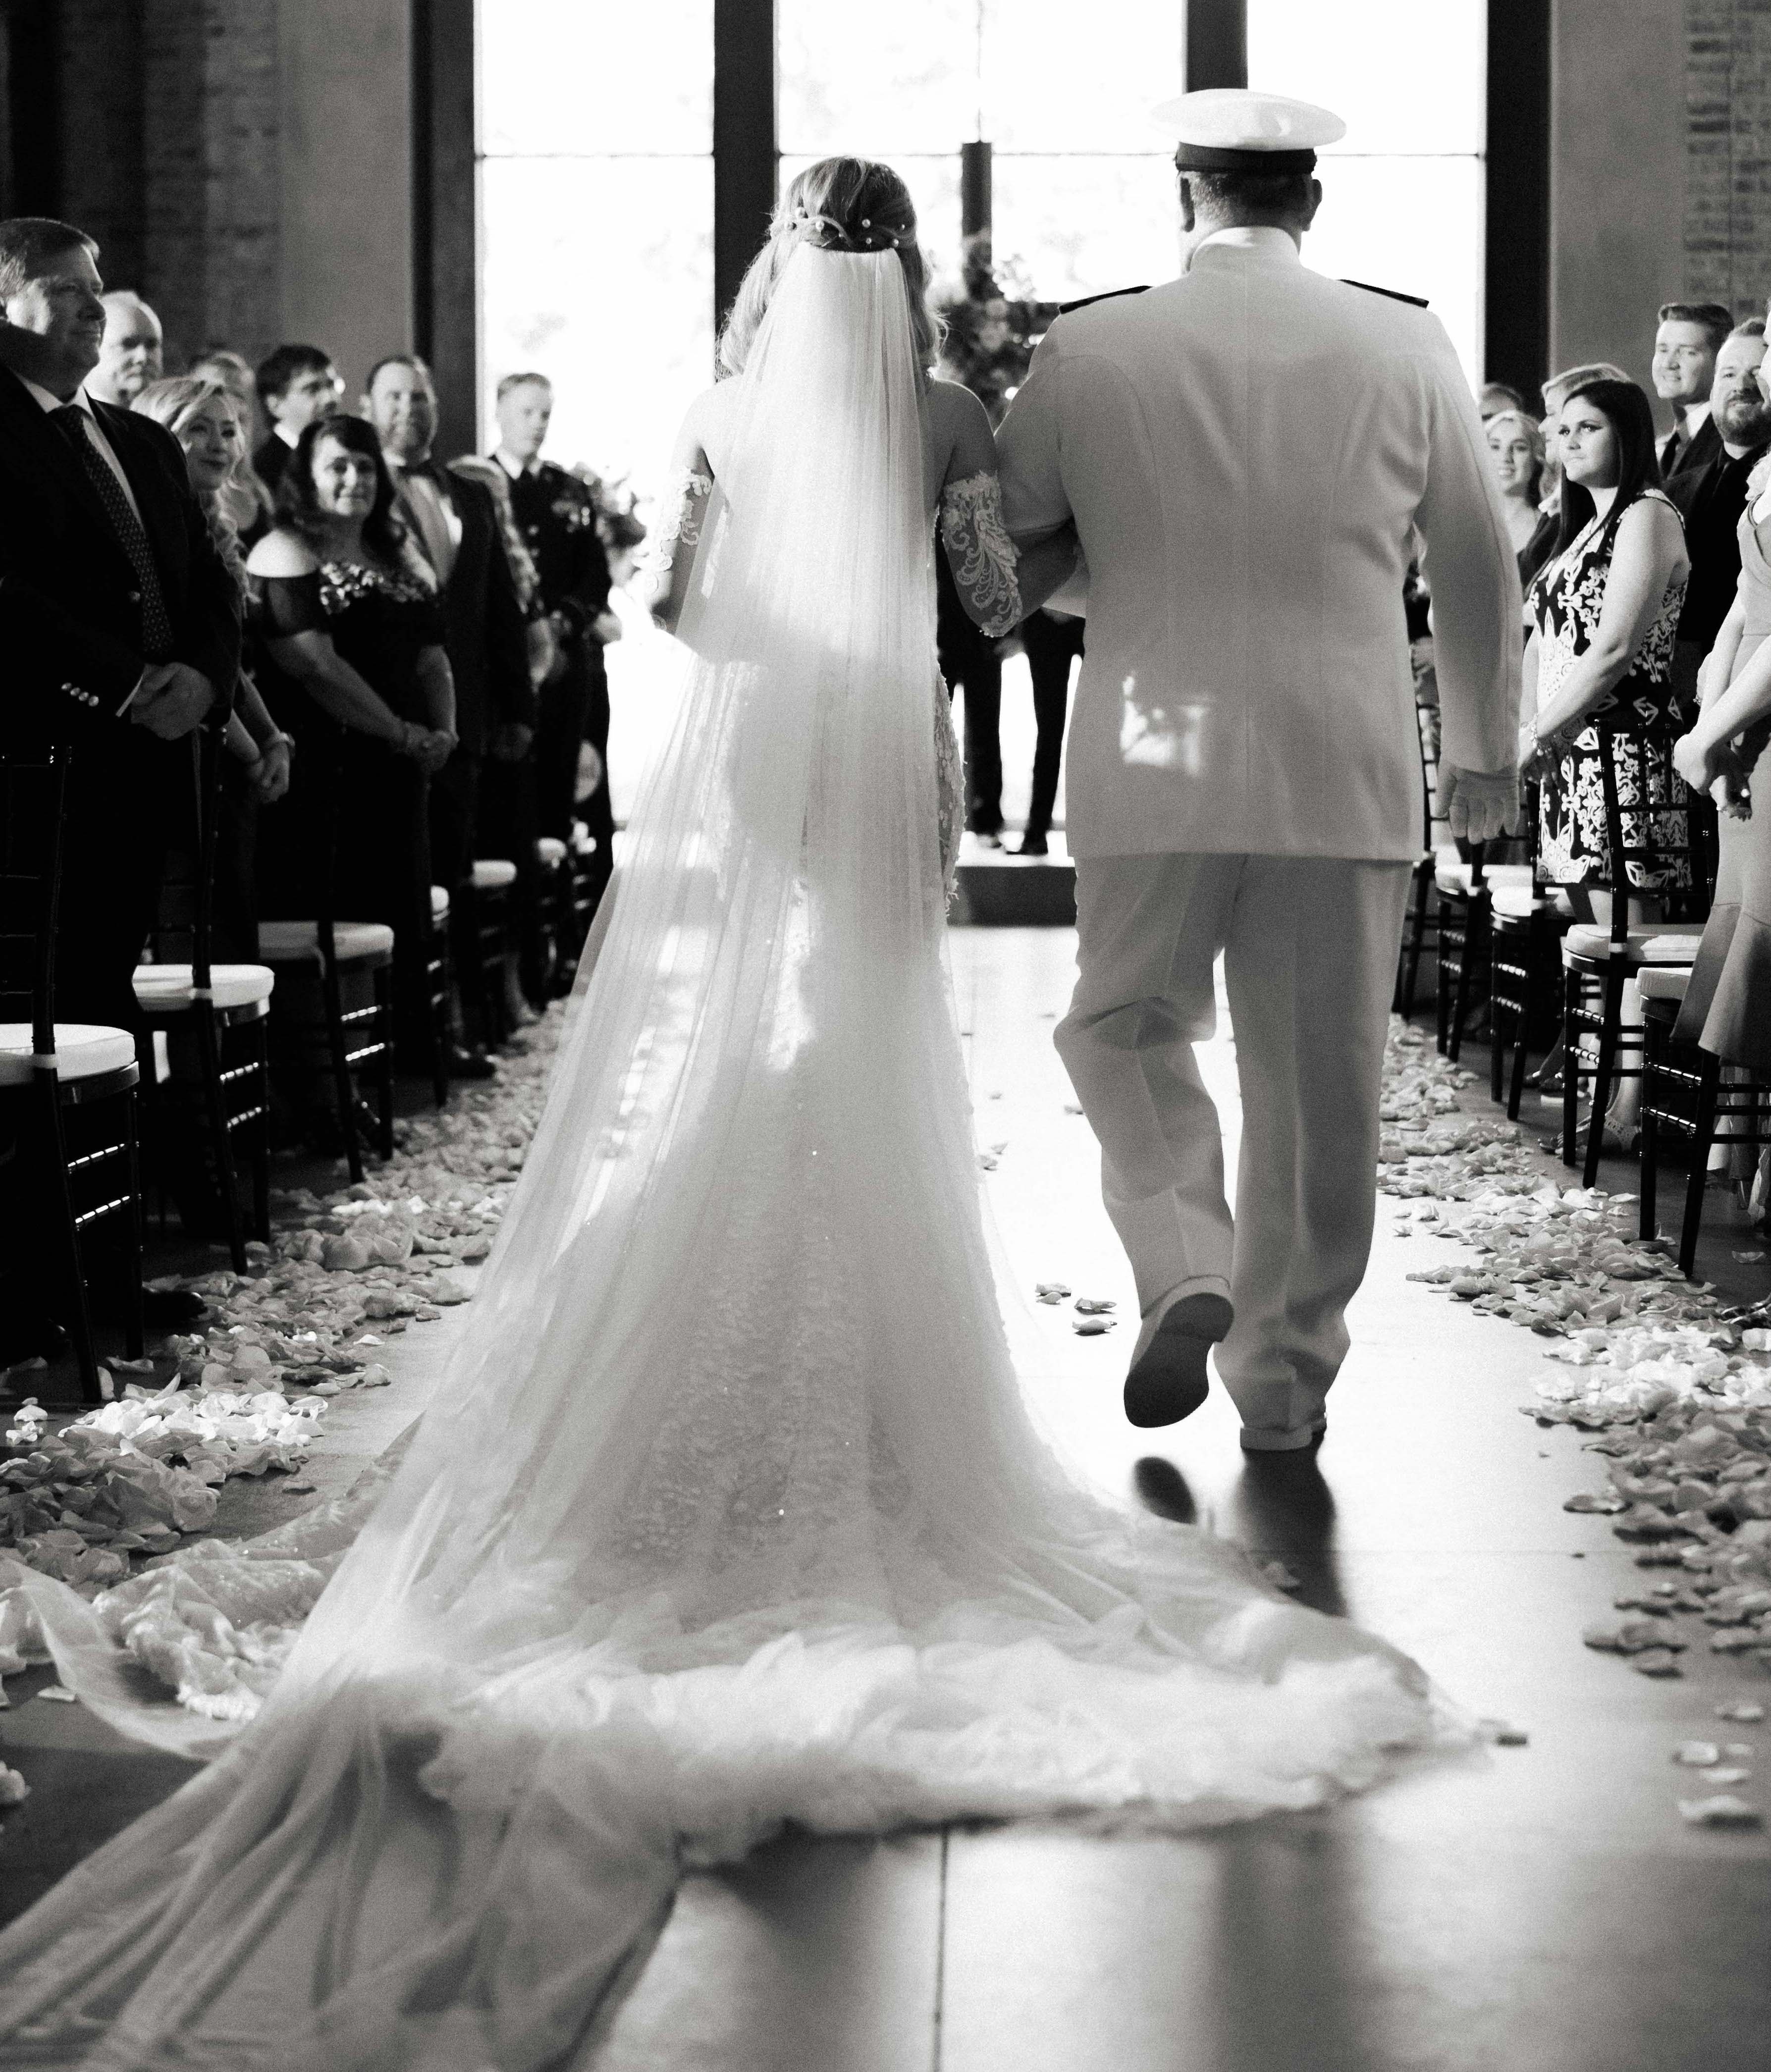 A black and white photo of a bride walking down the aisle with her dad. Their backs are turned to the camera.